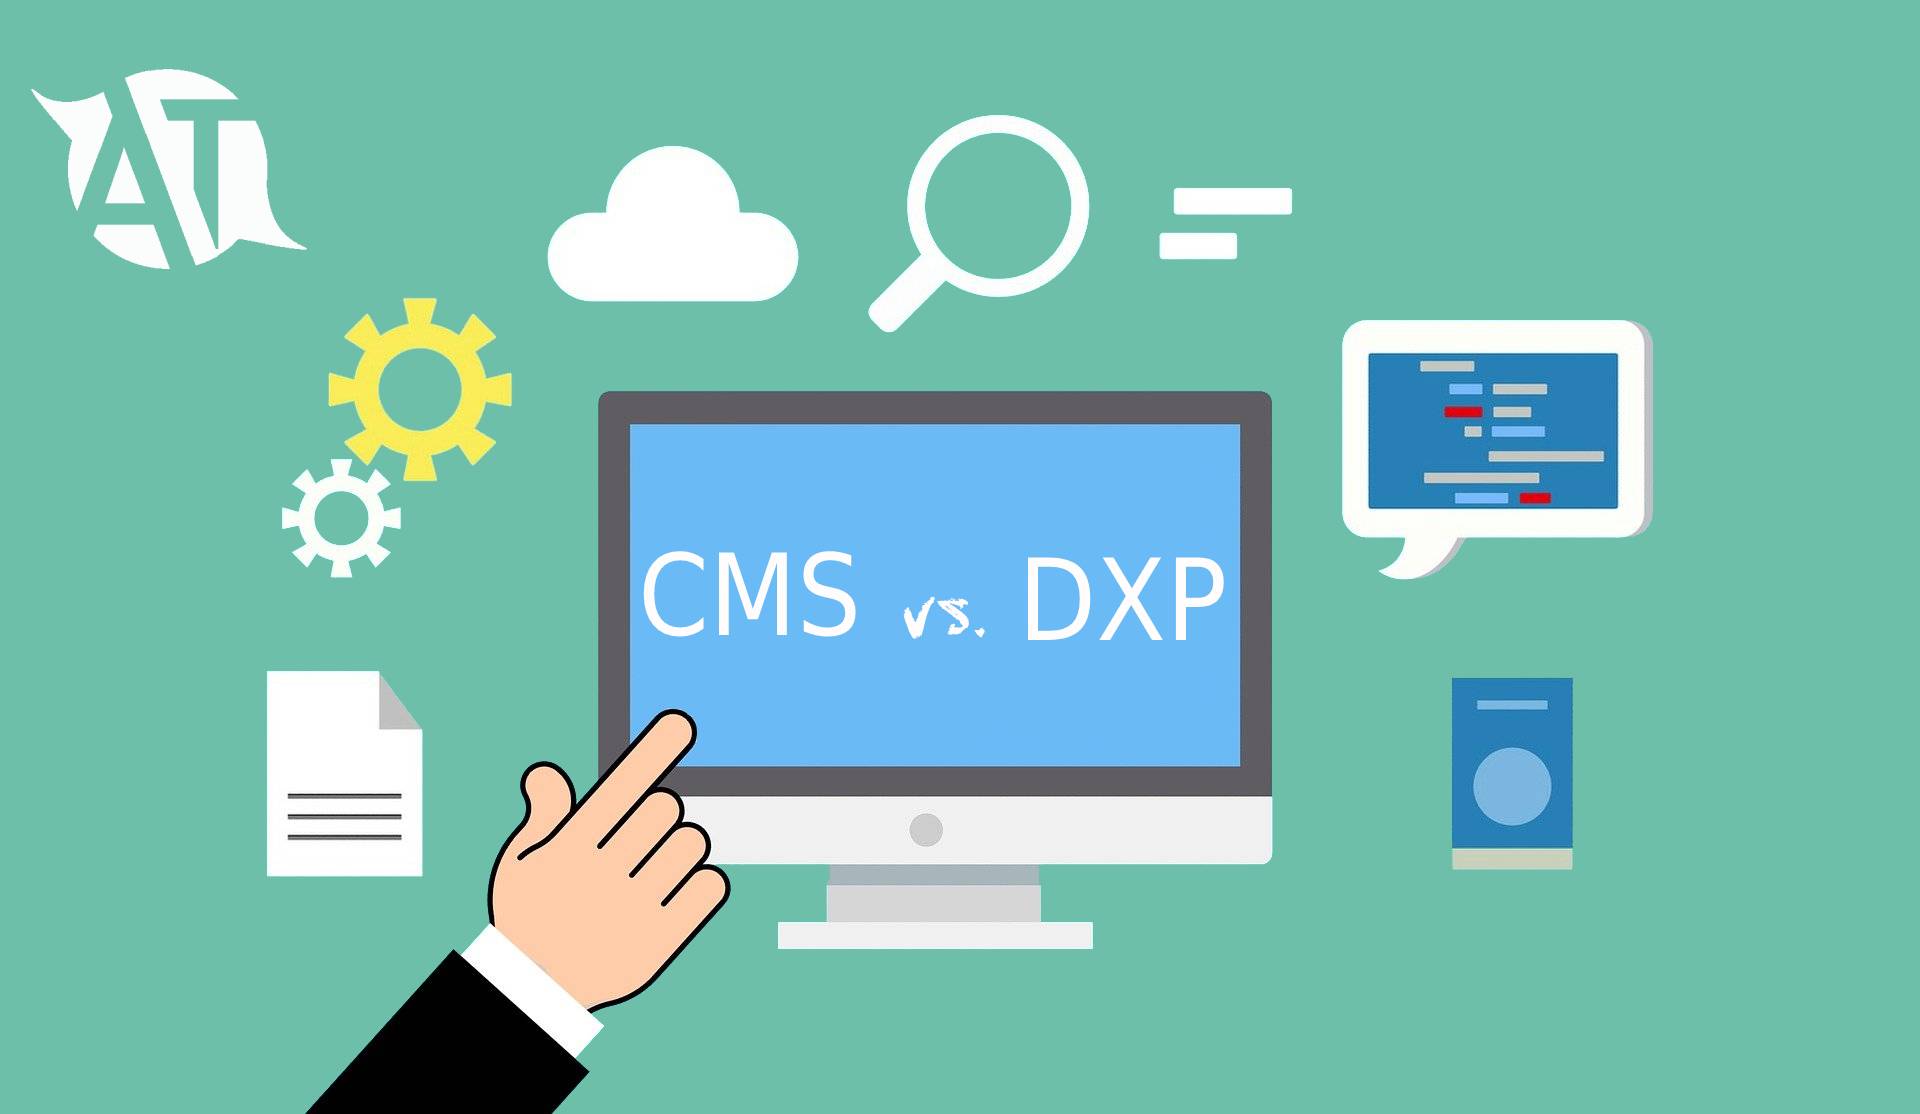 Differences between CMS and DXP